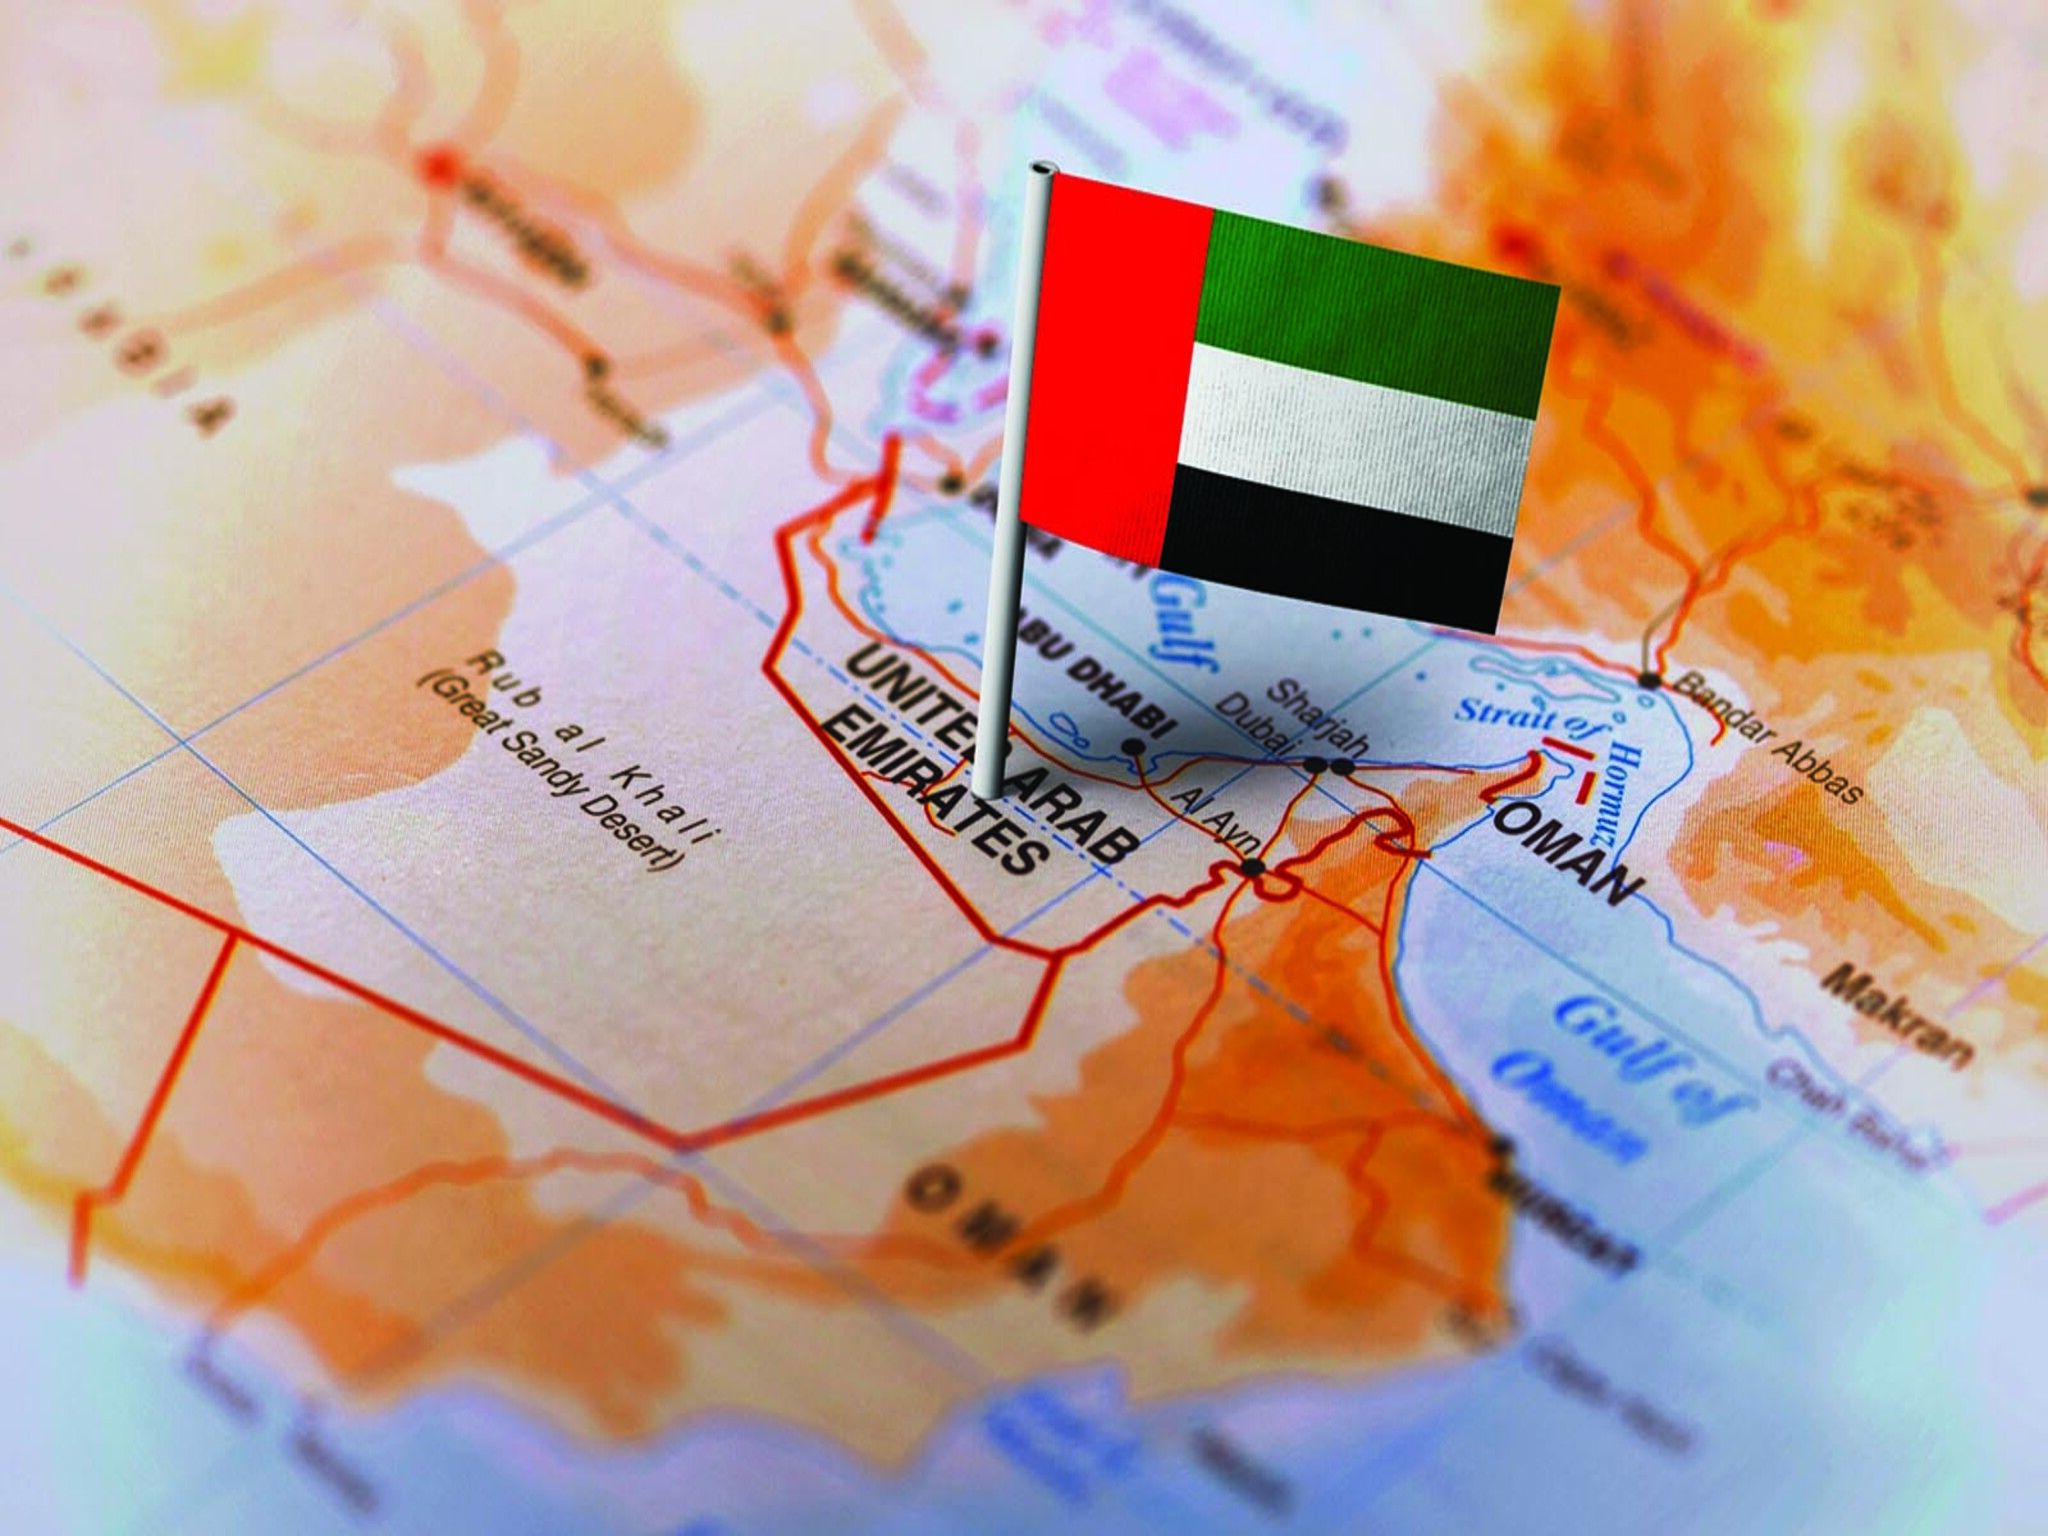 UAE Meteorology announces an earthquake off the coast of the UAE with a magnitude of 2.8